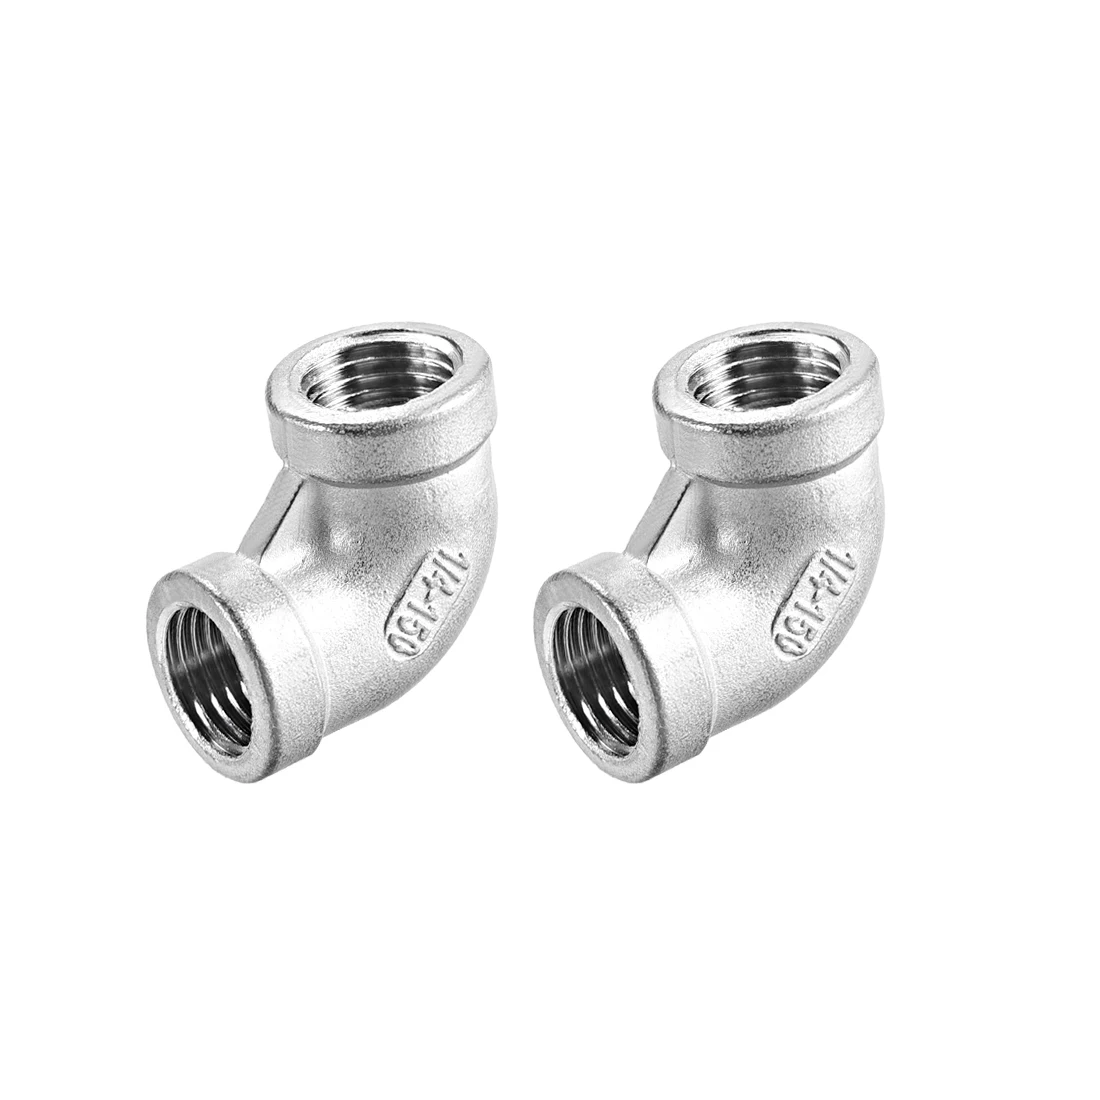 

uxcell 2pcs Stainless Steel 304 Cast Pipe Fitting 90 Degree Elbow 1/4 BSPT Female X 1/4 BSPT Female Thread to air water etc